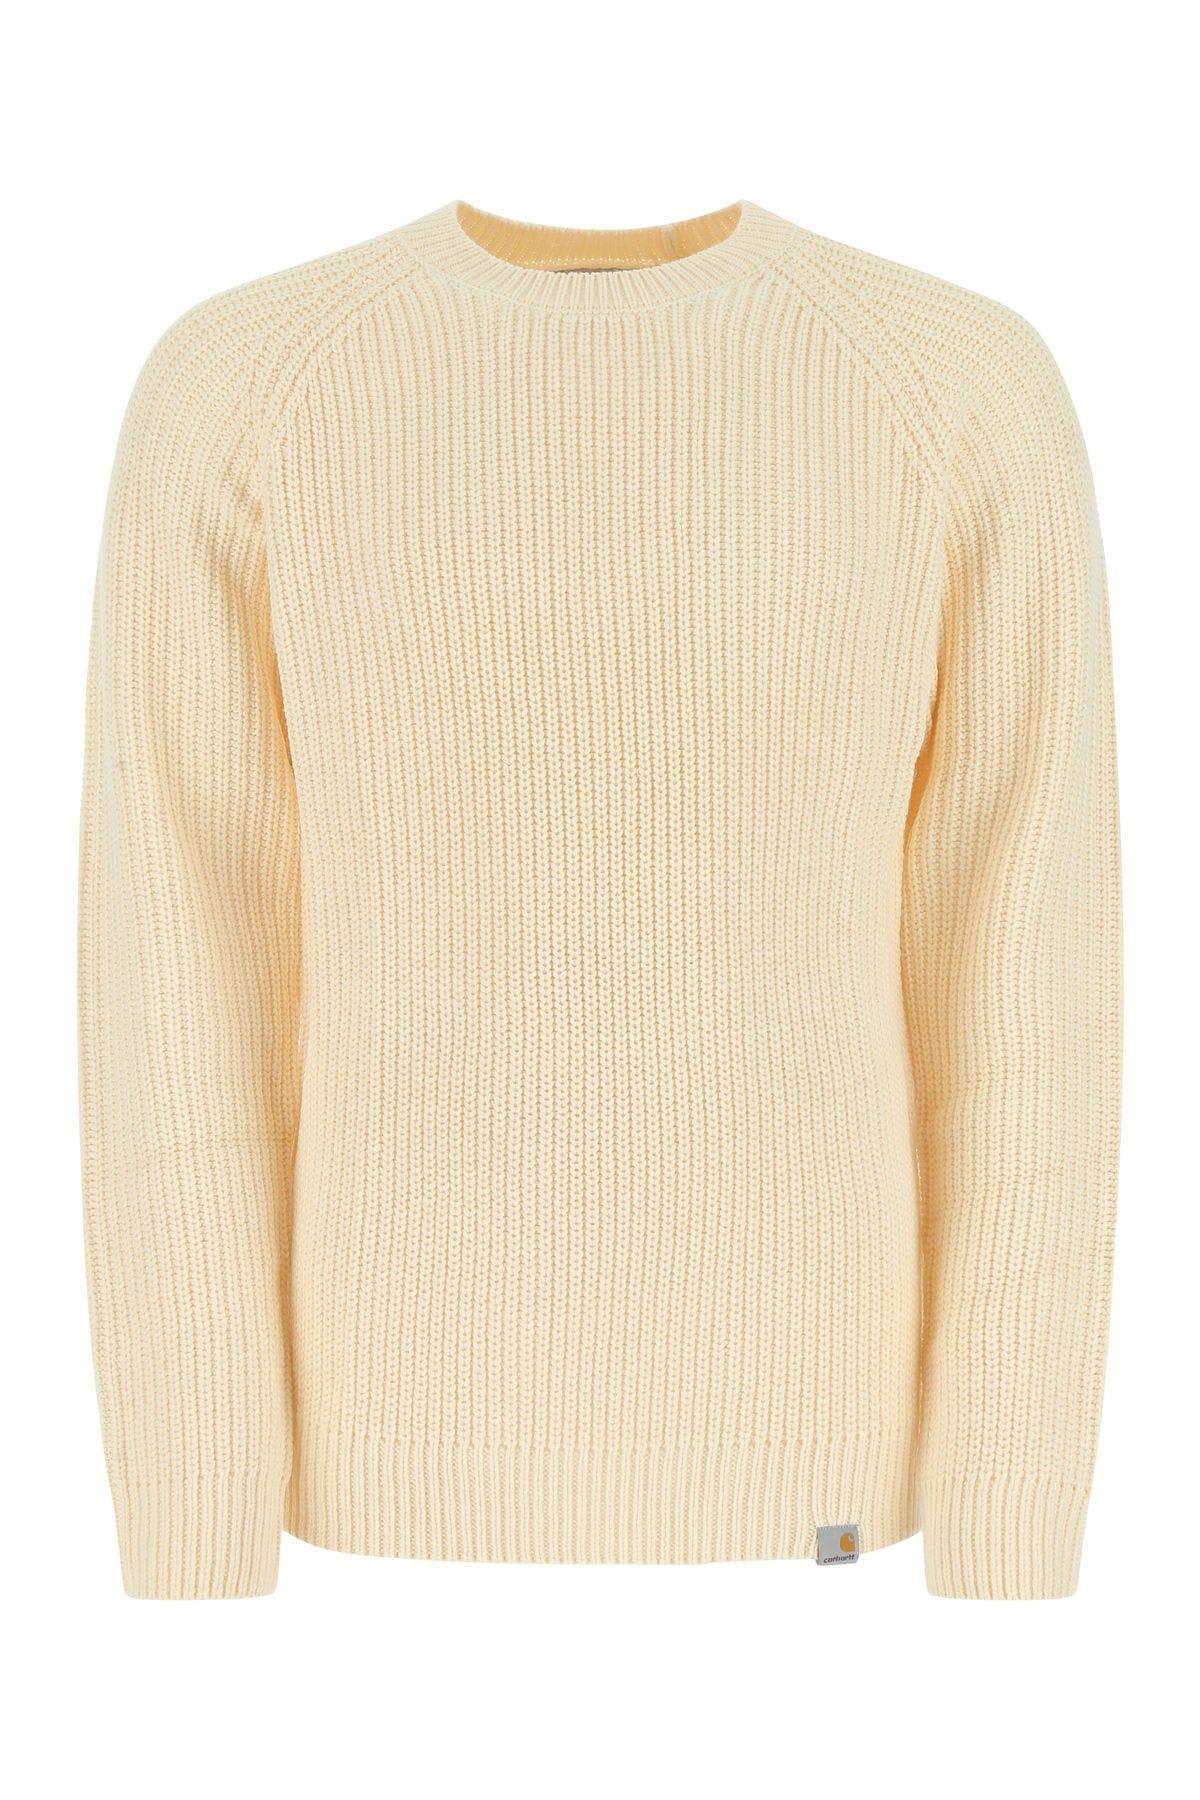 Carhartt Ivory Viscose Blend Forth Sweater